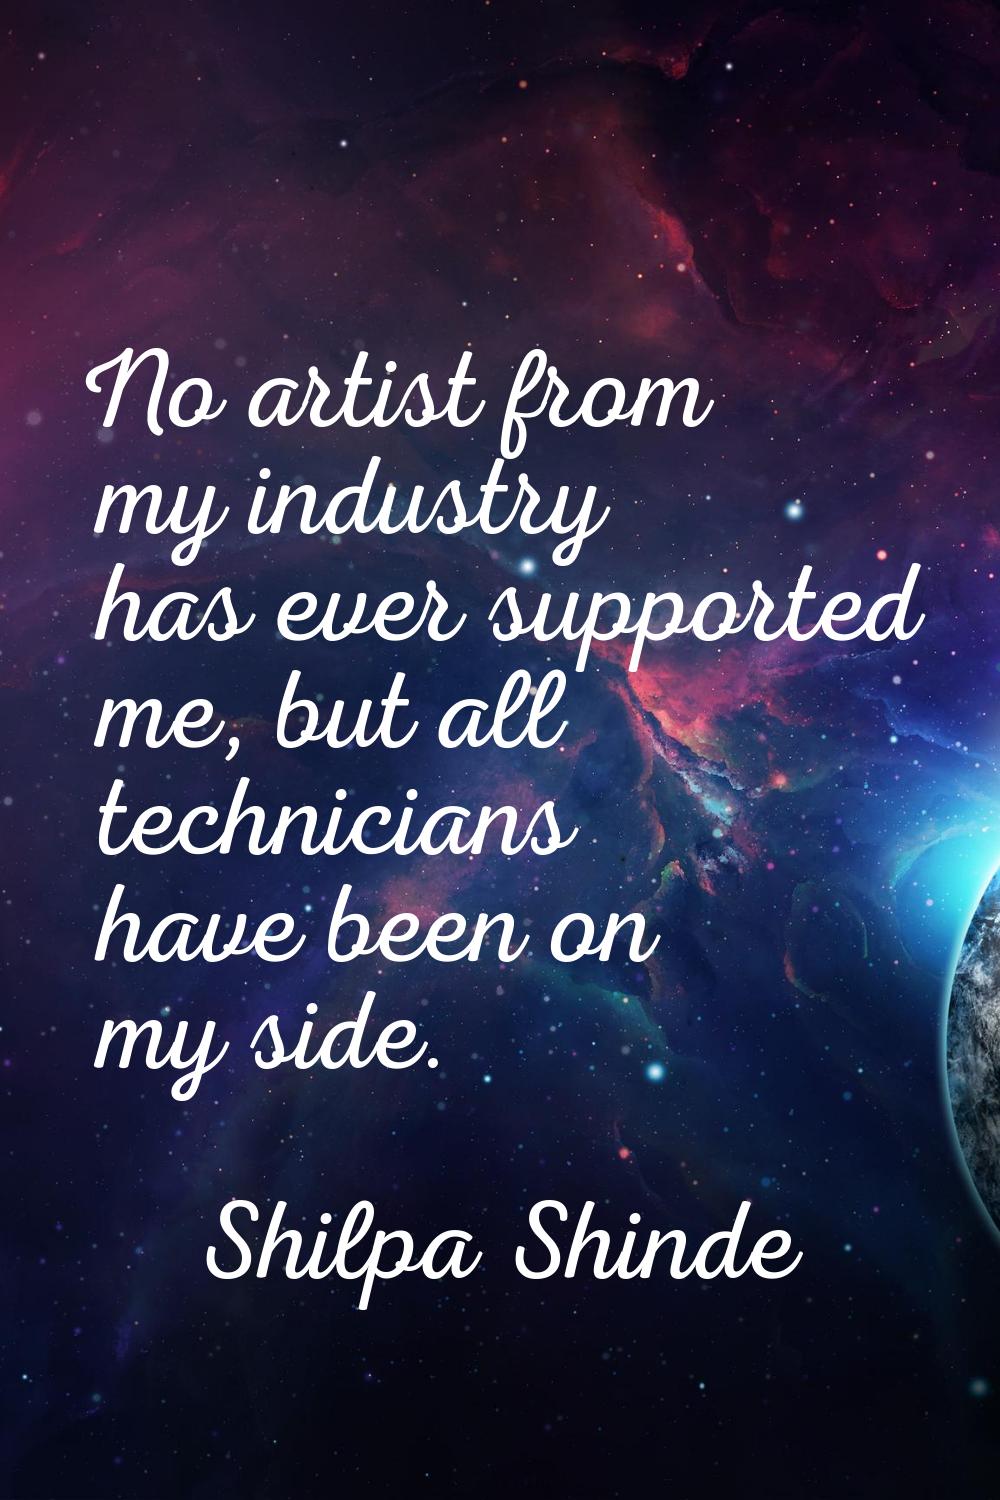 No artist from my industry has ever supported me, but all technicians have been on my side.